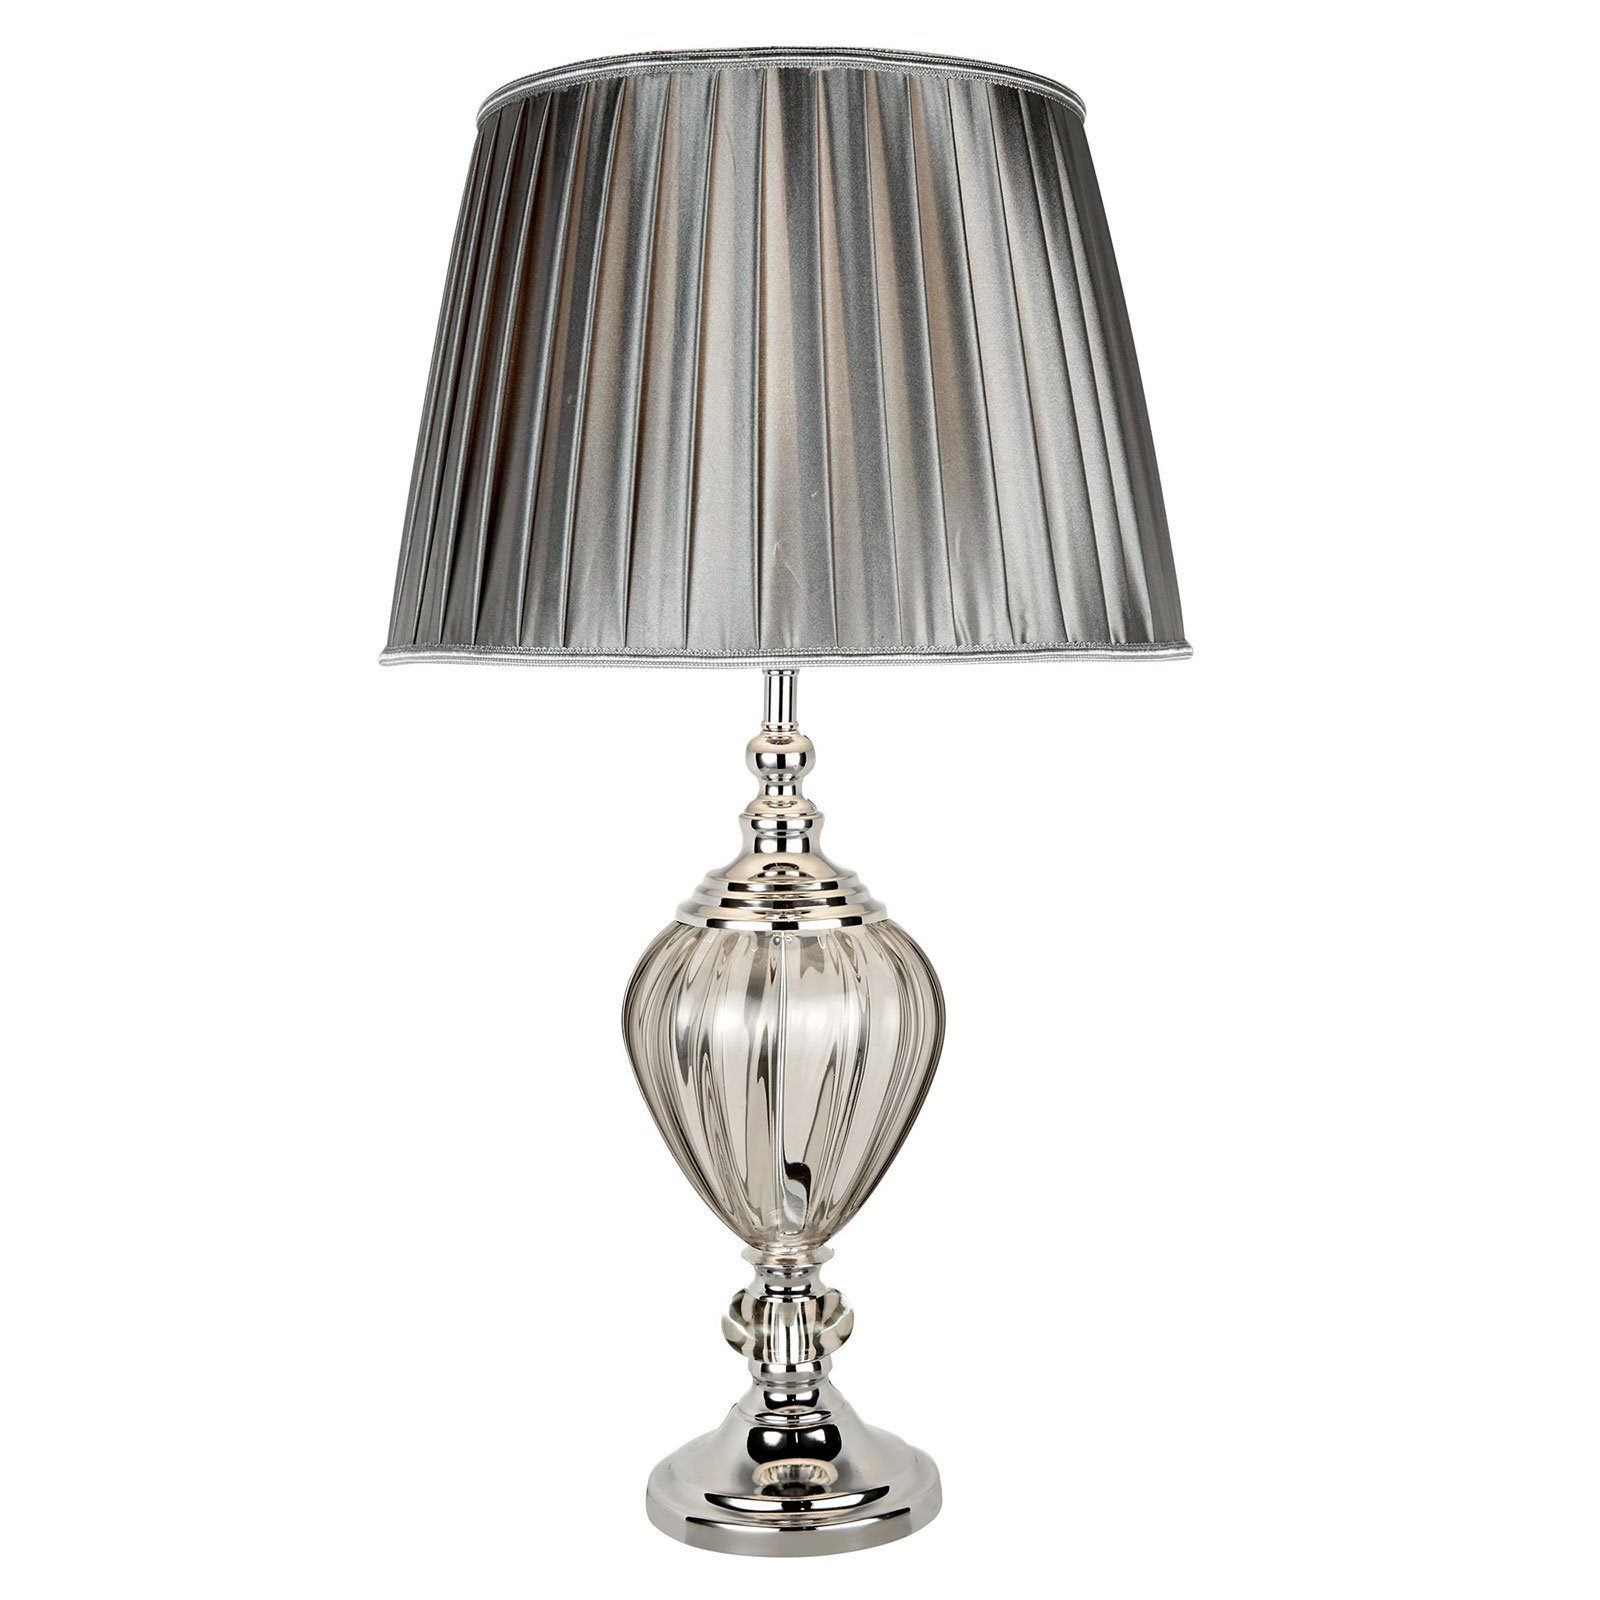 Greyson table lamp with fabric lampshade in grey